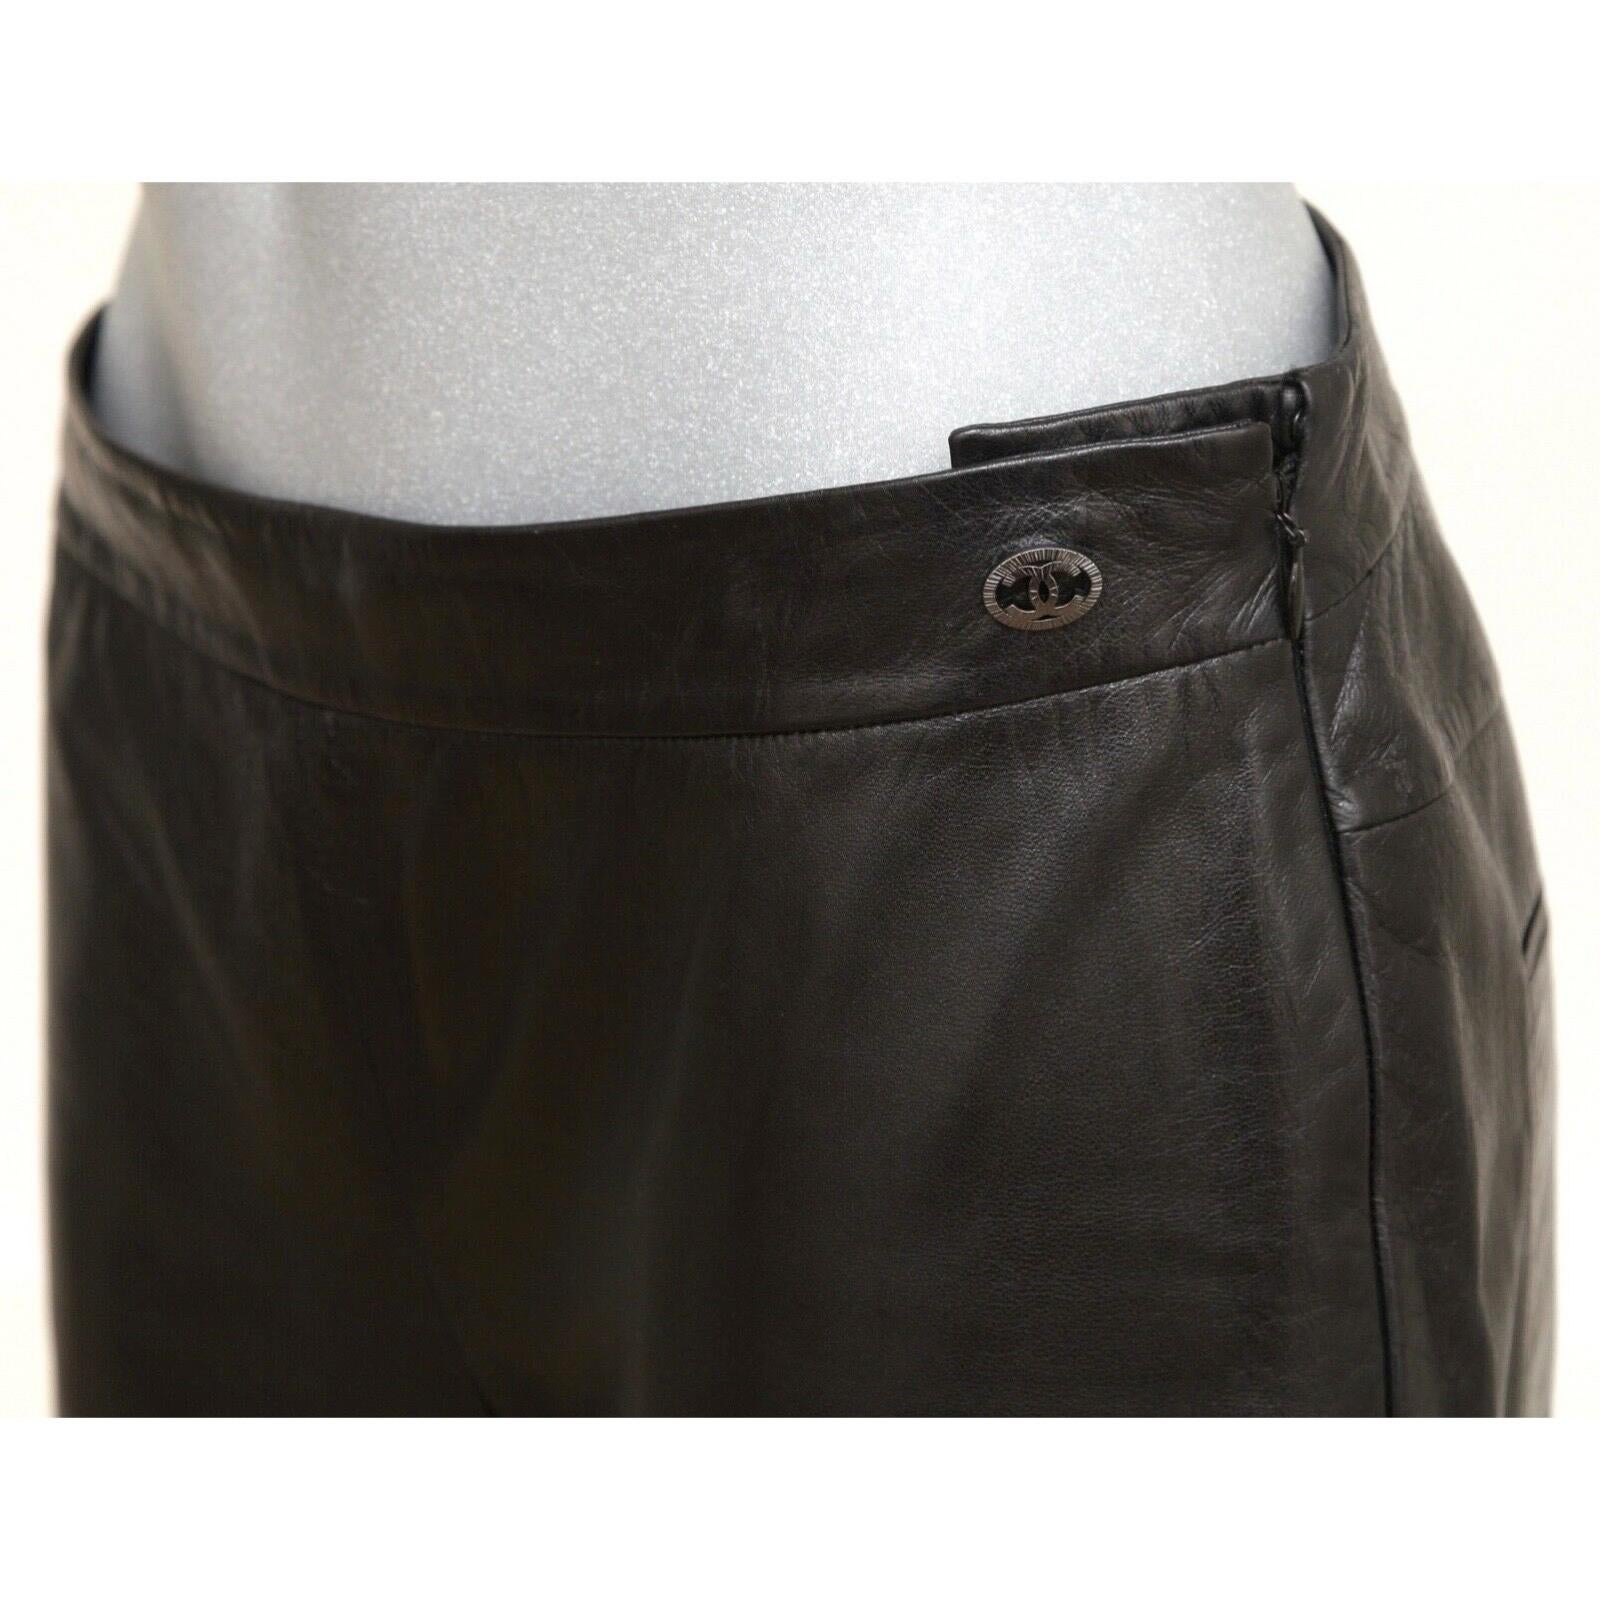 GUARANTEED AUTHENTIC CHANEL LAMBSKIN BLACK LEATHER PANTS

Details:
- Soft semi-shiny black lambskin leather pant.
- Chanel plaque at left waist.
- Size zipper and interior button closure.
- Rear pockets.
- Fully lined.

Fabric: 100% Lambskin